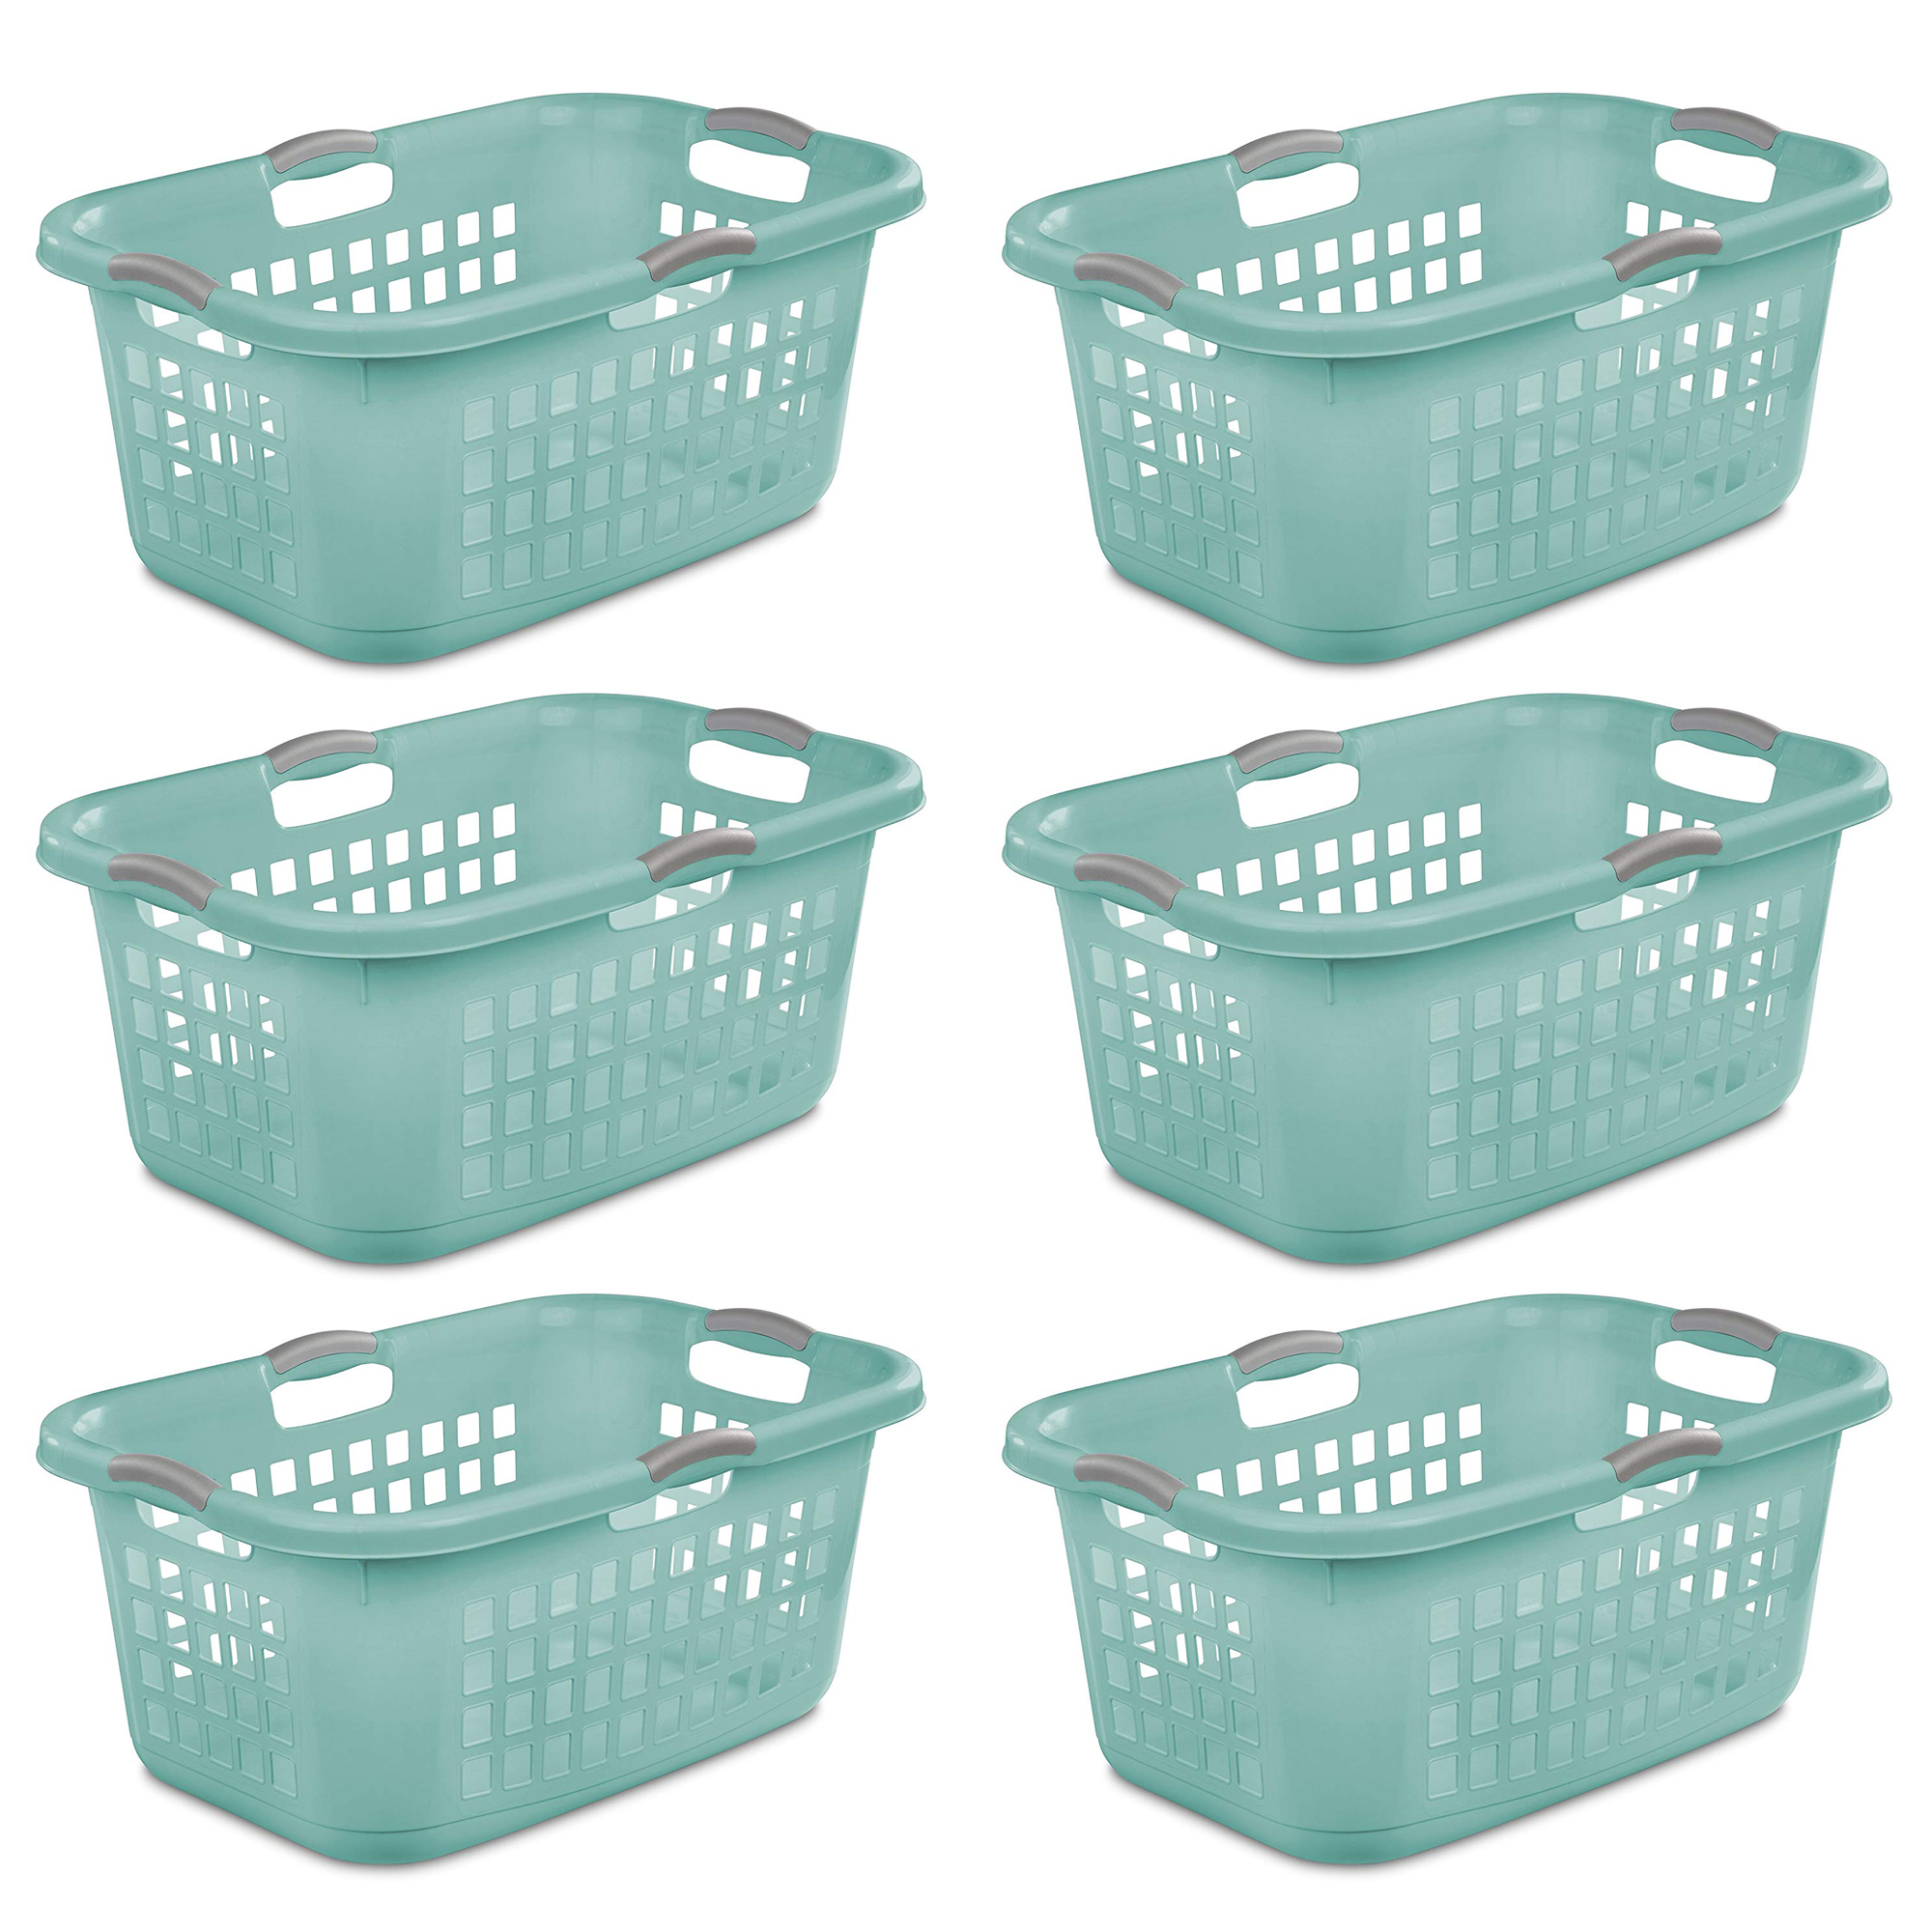 Laundry Basket Plastic Basket Swivel Stack Container Container Green Market Basket NEW 